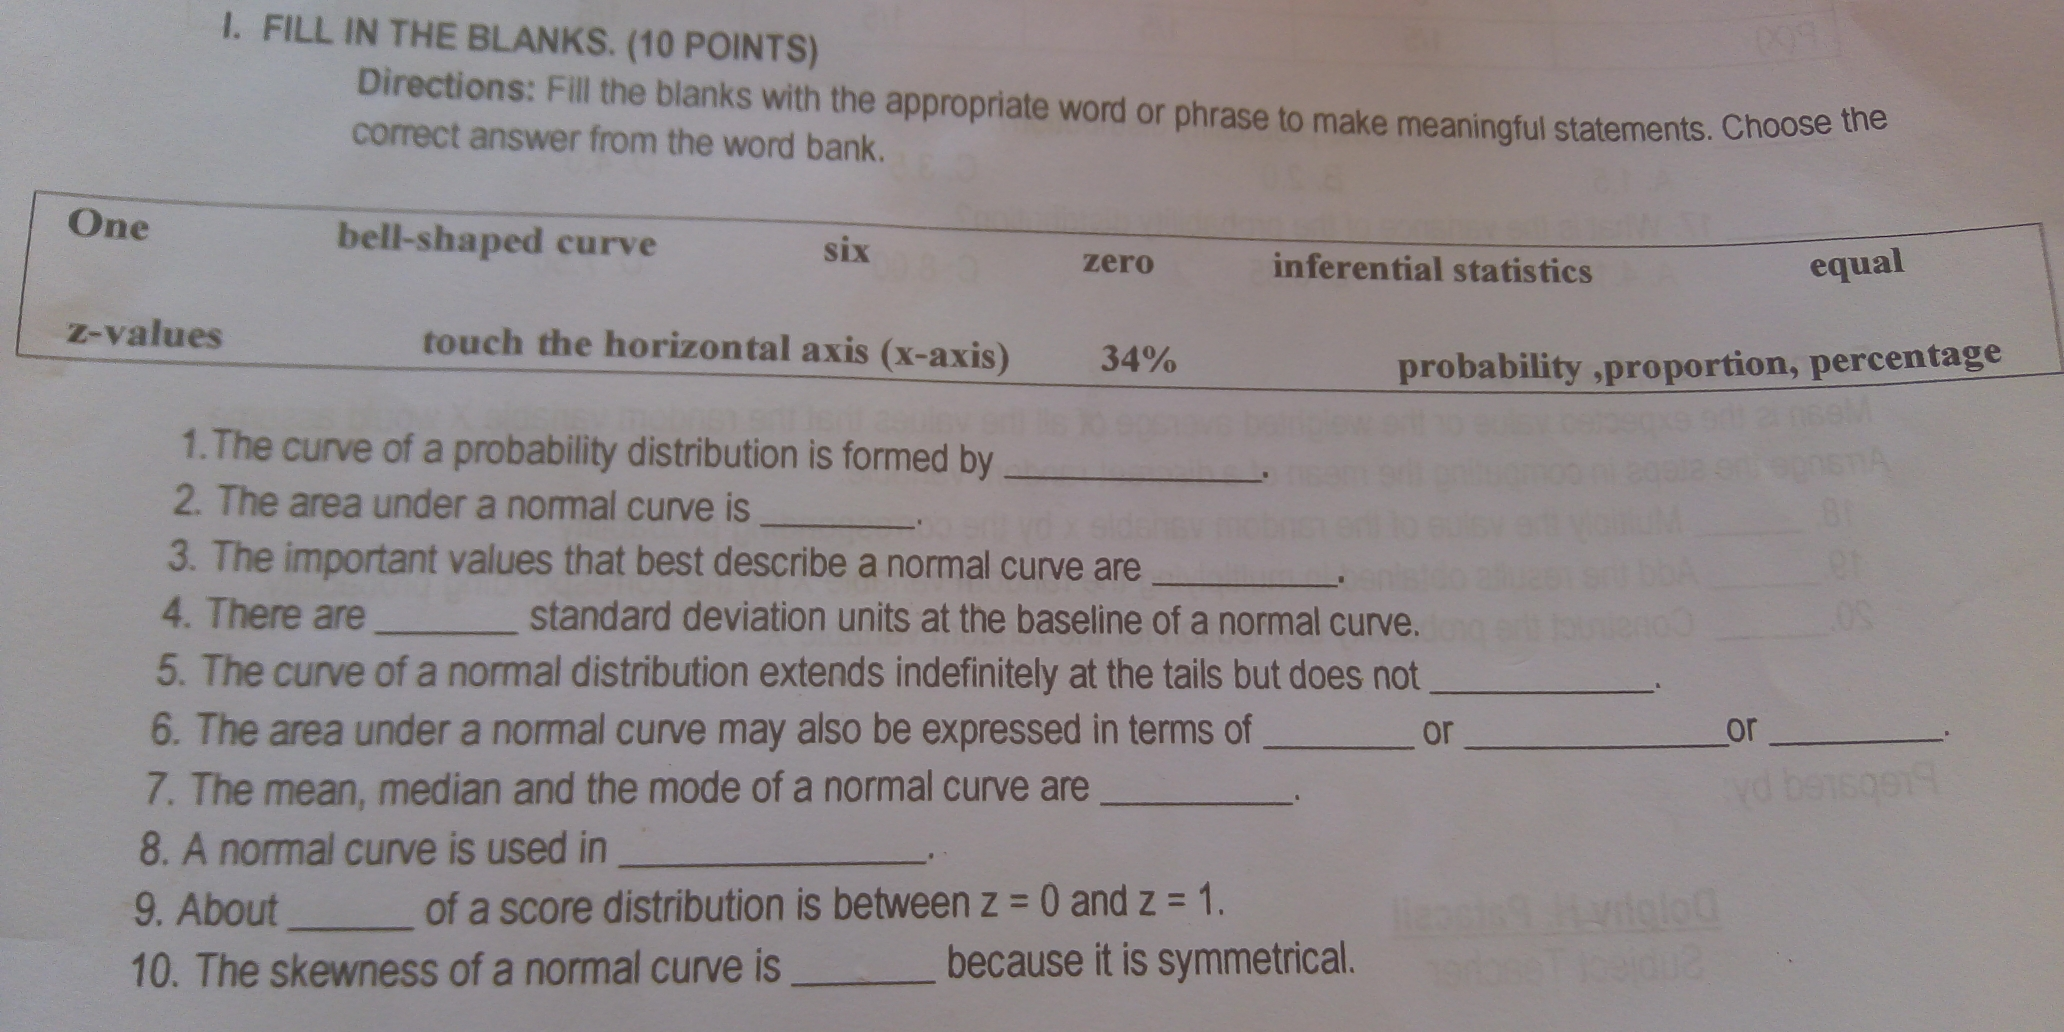 I. FILL IN THE BLANKS. 10 POINTS Directions: Fill the blanks with the appropriate word or phrase to make meaningful statements. Choose the correct answer from the word bank. One bell-shaped curve six zero inferential statistics equal z-values touch the horizontal axis x-axis 34% probability ,proportion, percentage 1.The curve of a probability distribution is formed by _. 2. The area under a normal curve is _. 3. The important values that best describe a normal curve are _. 4. There are_standard deviation units at the baseline of a normal curve. 5. The curve of a normal distribution extends indefinitely at the tails but does not 6. The area under a normal curve may also be expressed in terms of_or__or 、 7. The mean, median and the mode of a normal curve are _. 8. A normal curve is used in_.、 9, About_of a score distribution is between z=0 and z=1 10. The skewness of a normal curve is_because it is symmetrical.